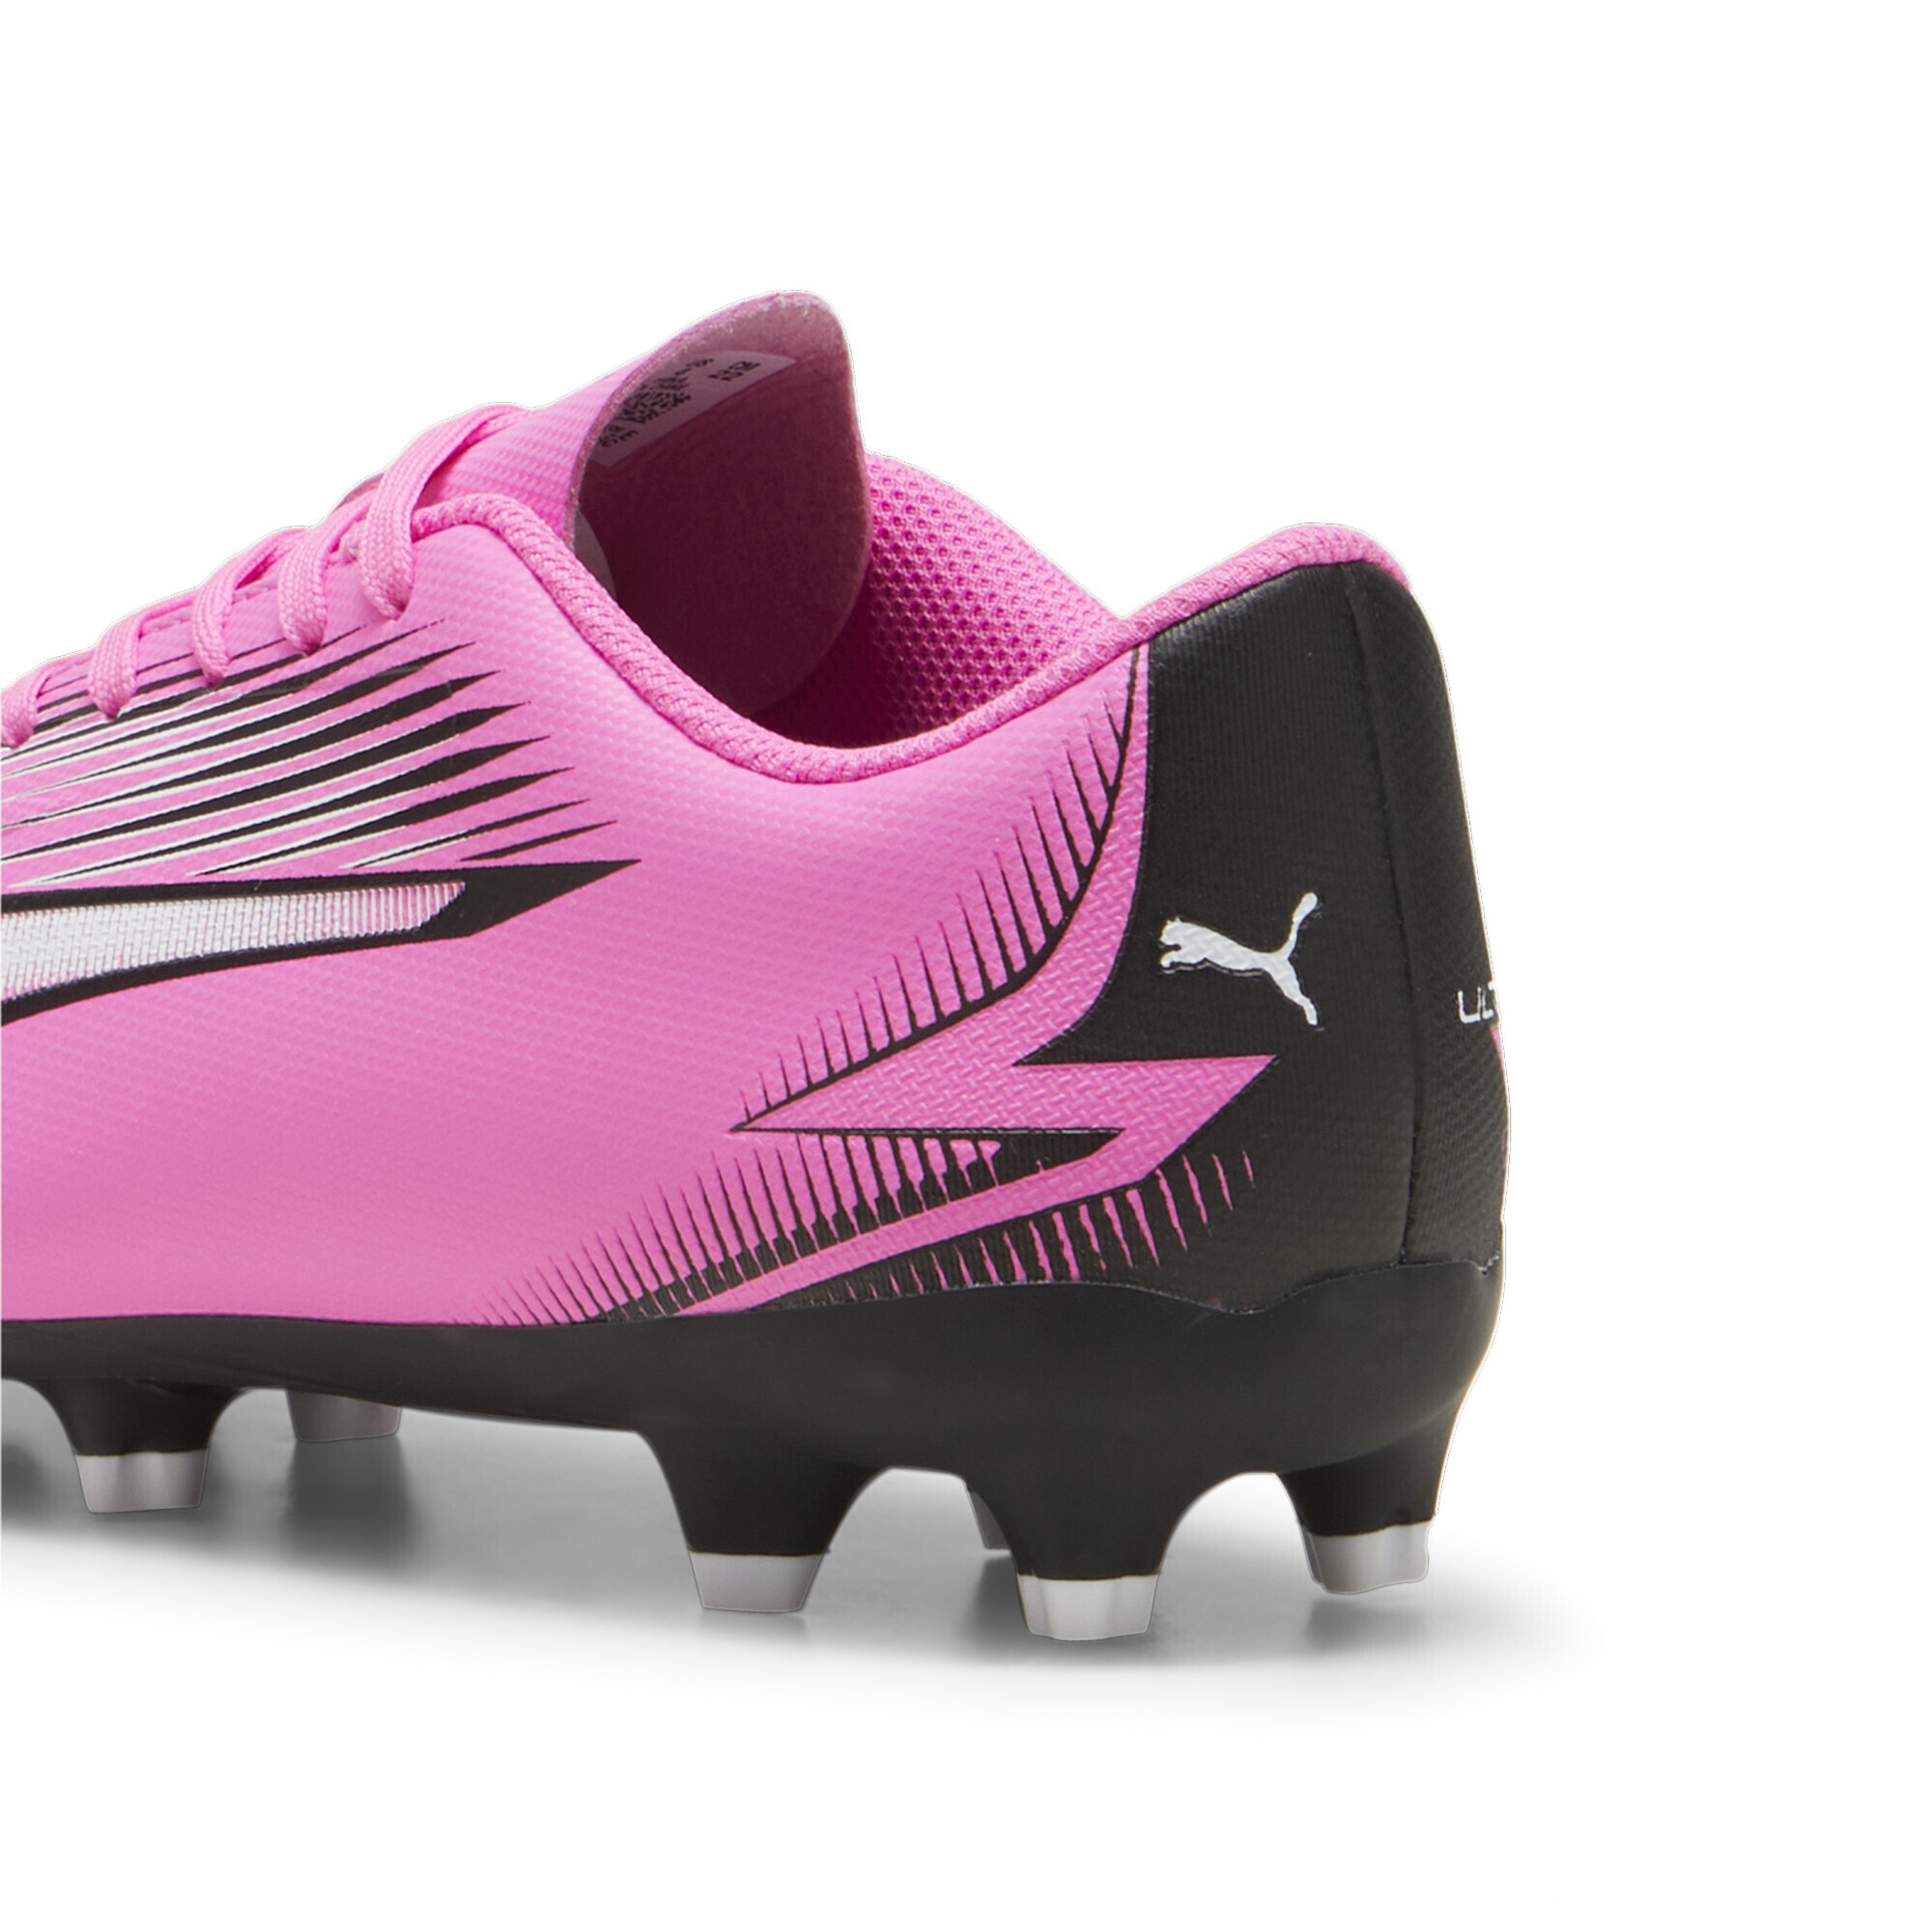 PUMA ULTRA PLAY FG/AG Youth Football Boots In Pink, Size EU 35.5